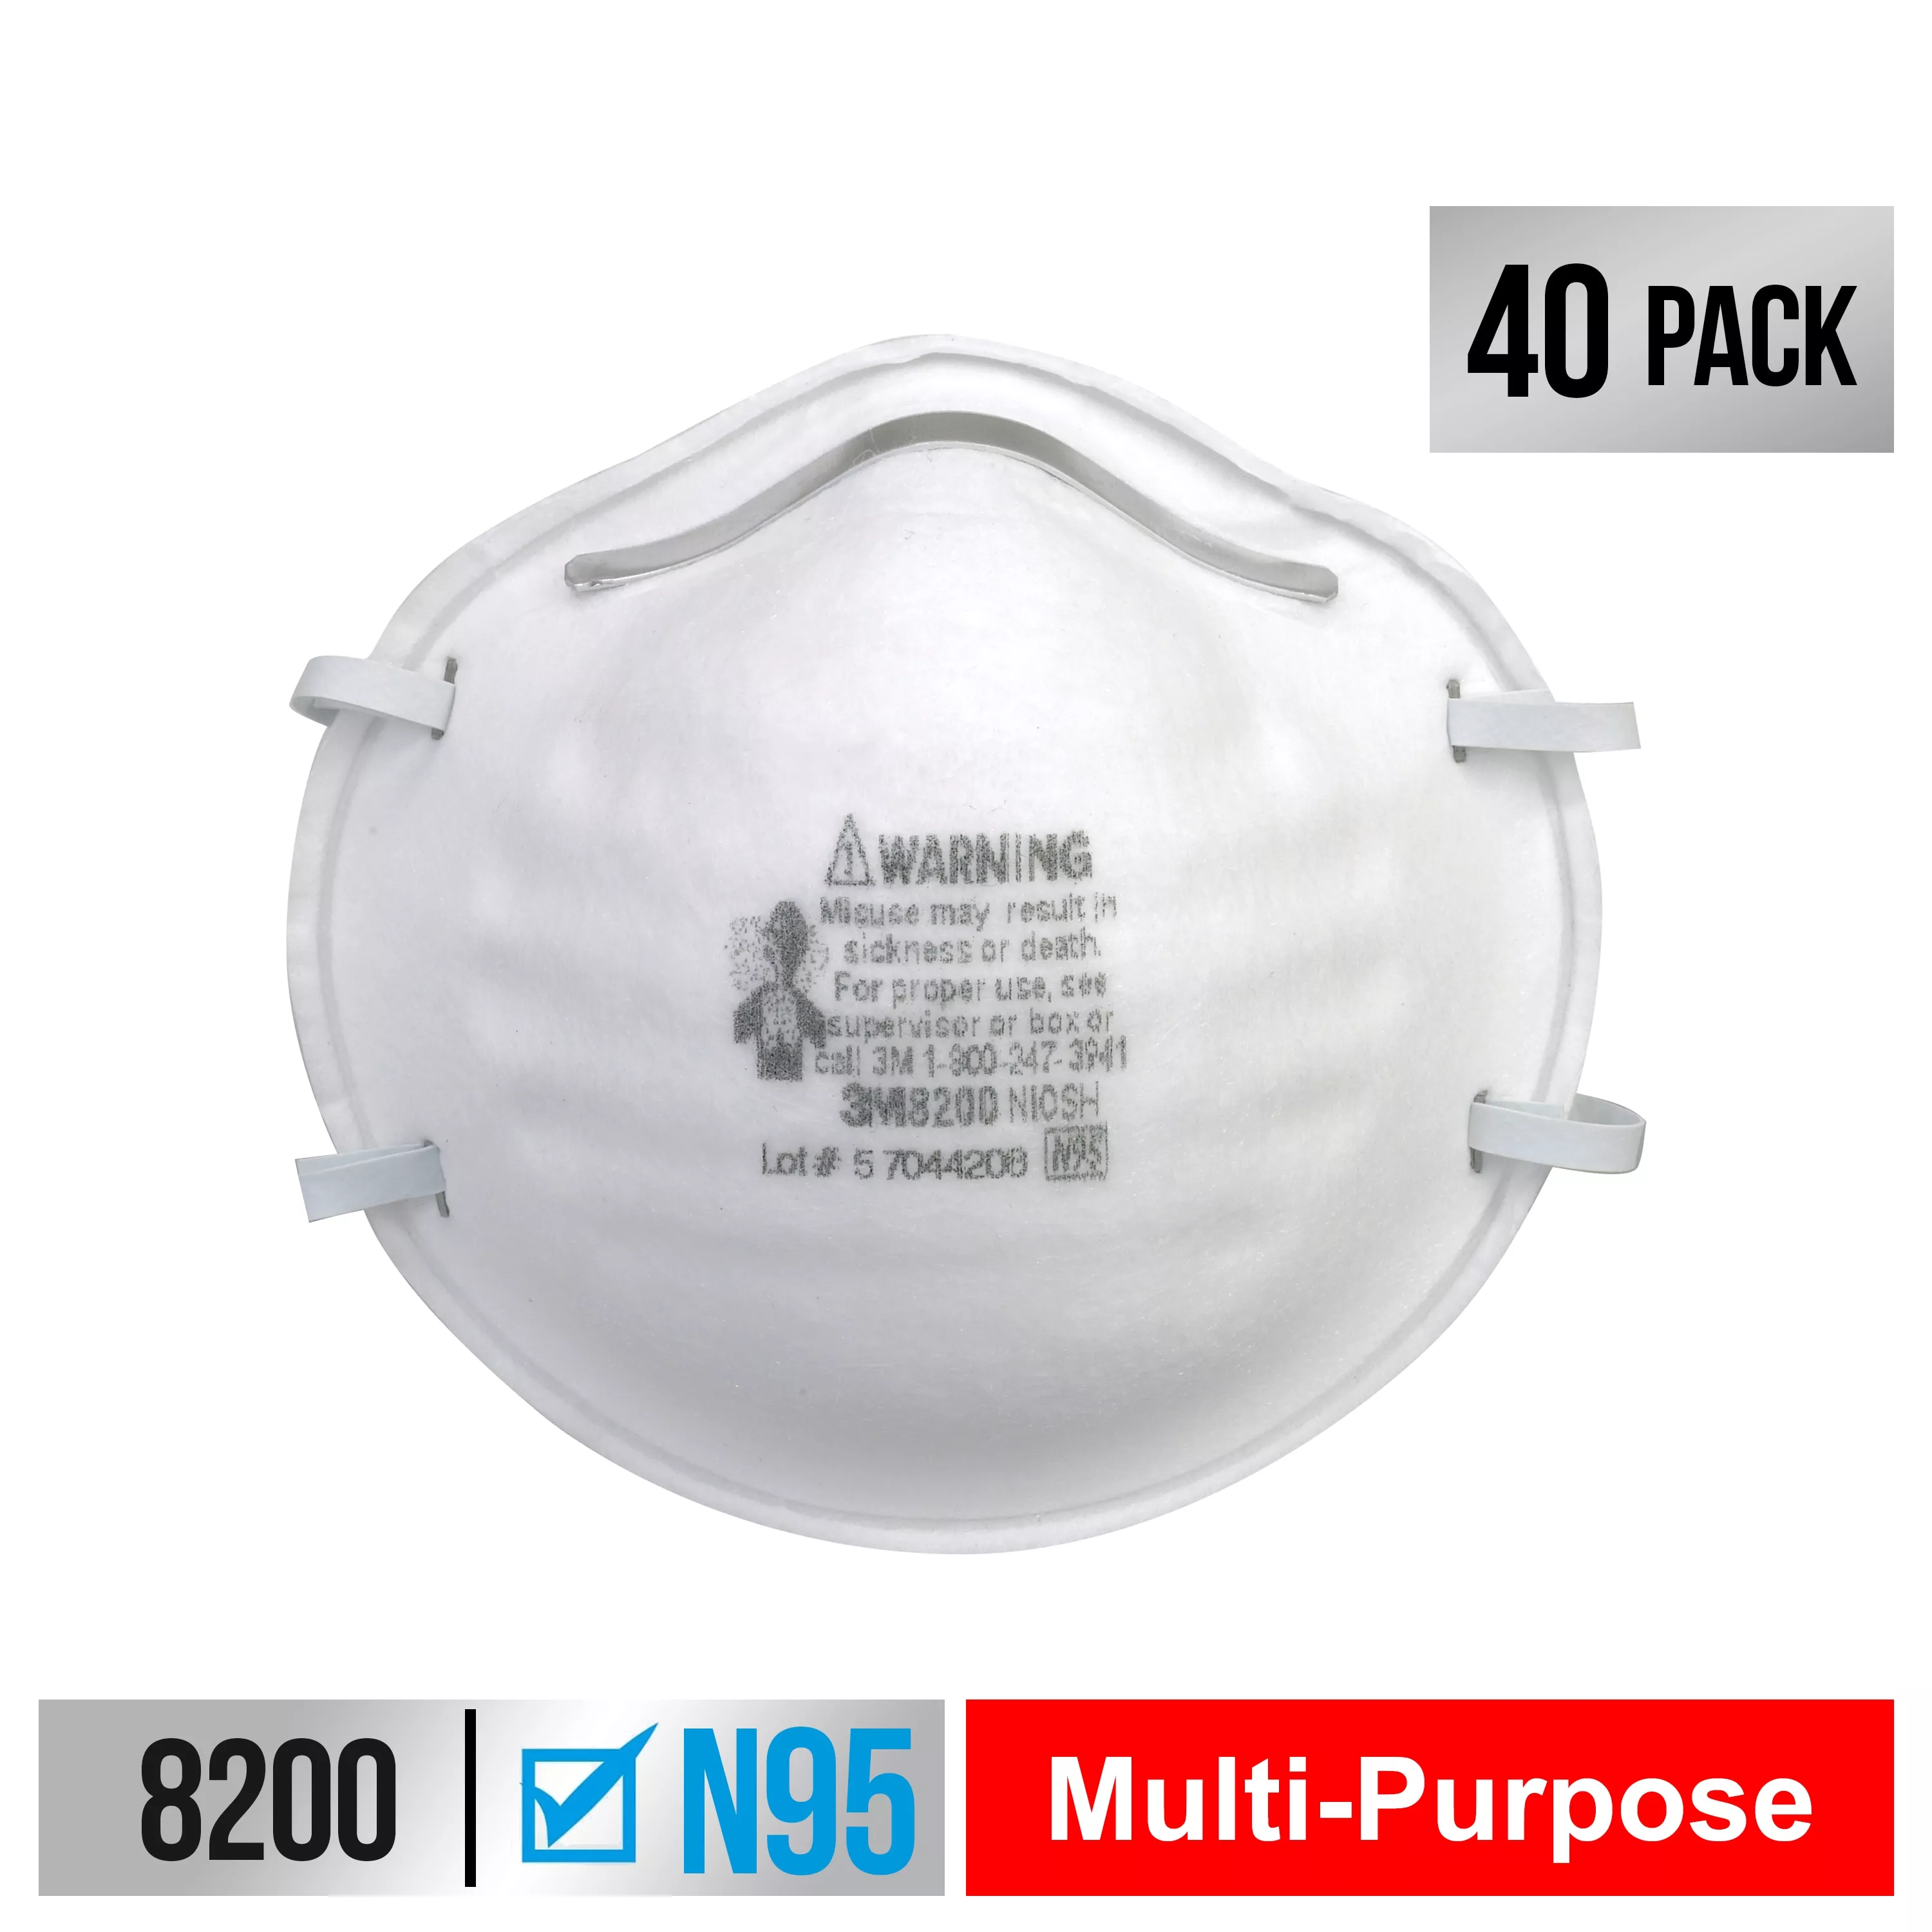 3M™ Sanding and Fiberglass Respirator N95 Particulate, 8200H40-DC, 40
eaches/pack, 4 packs/case